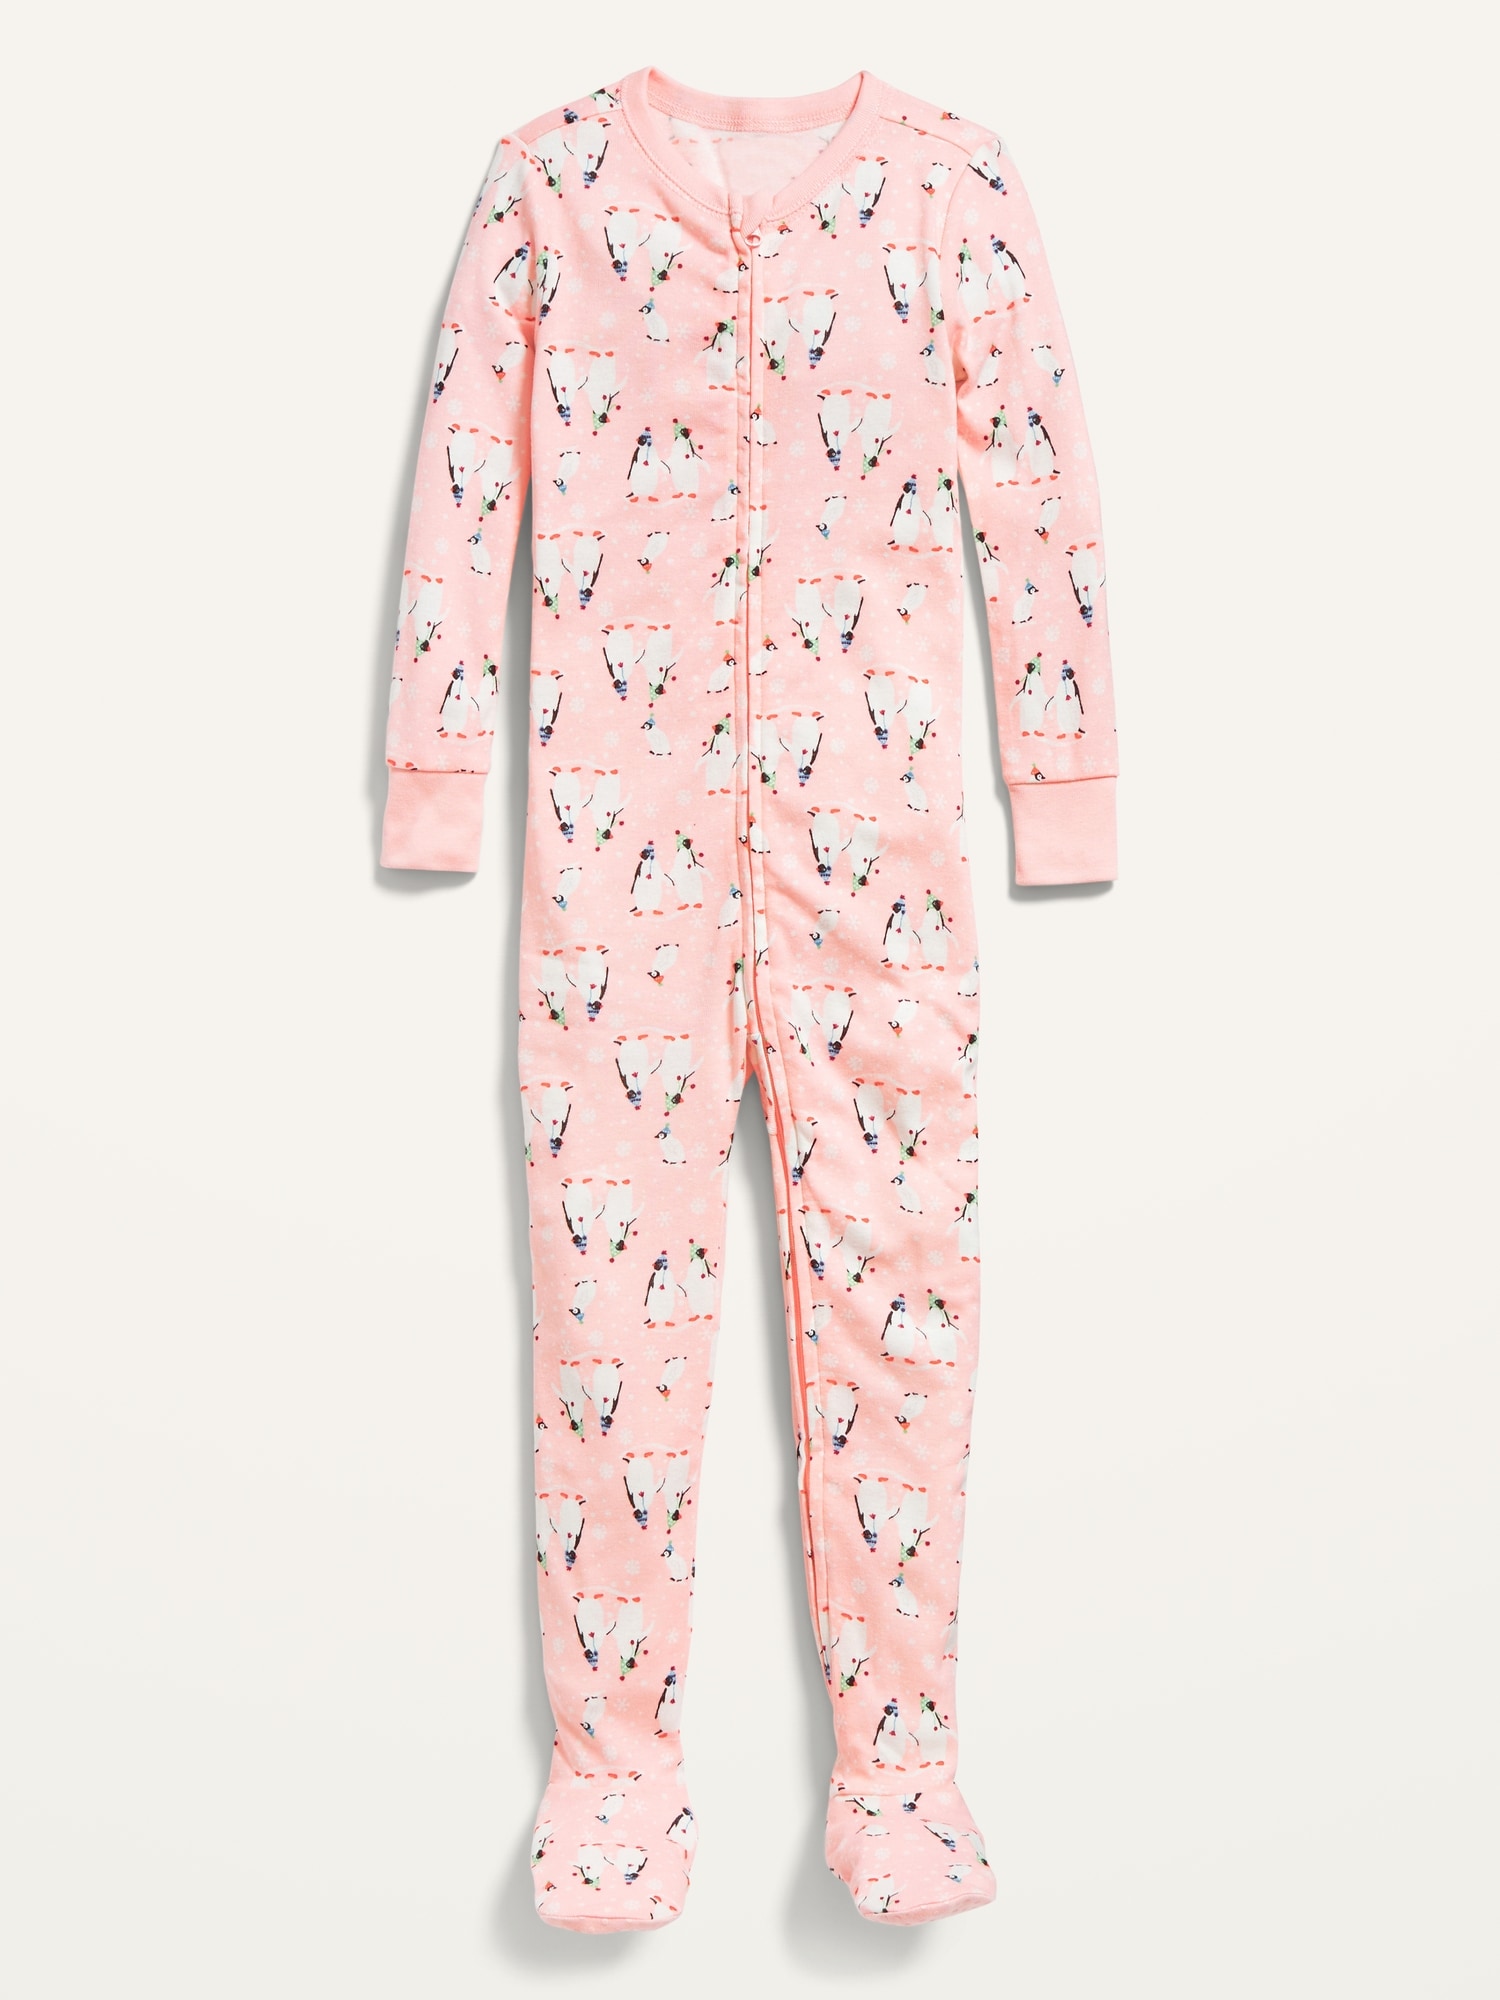 Unisex Printed One-Piece Footie Pajamas for Toddler & Baby | Old Navy